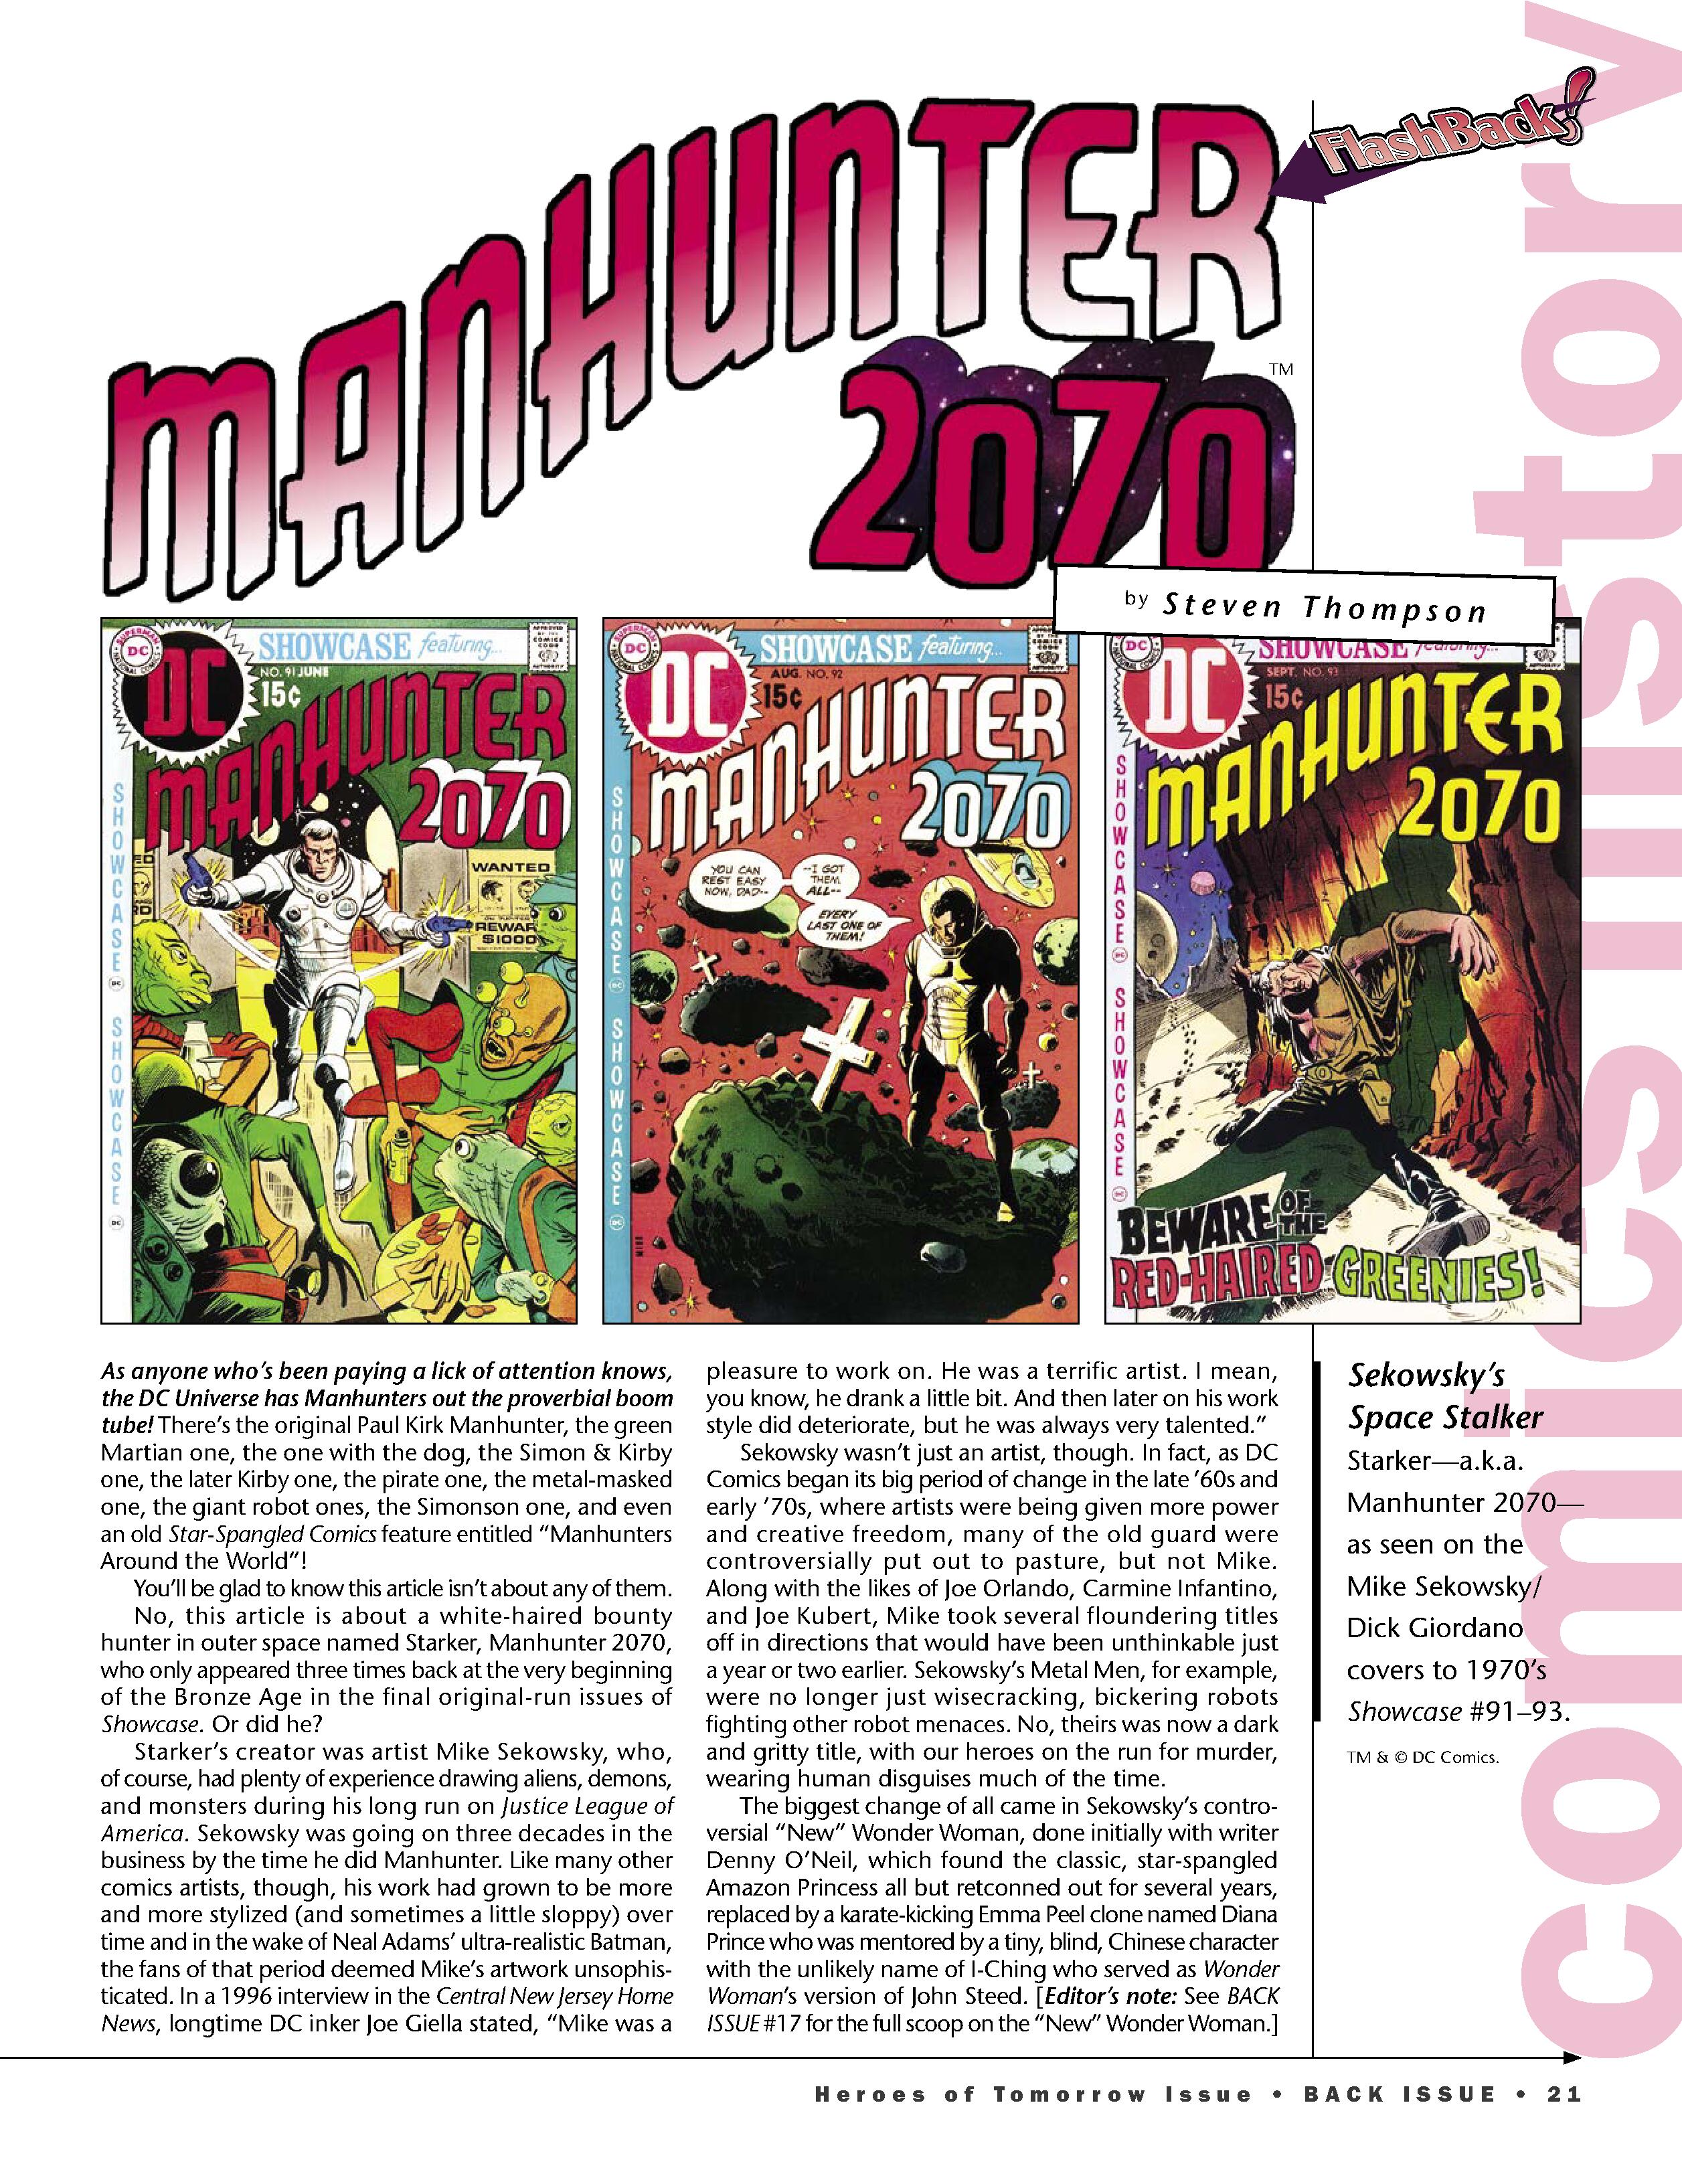 Read online Back Issue comic -  Issue #120 - 23